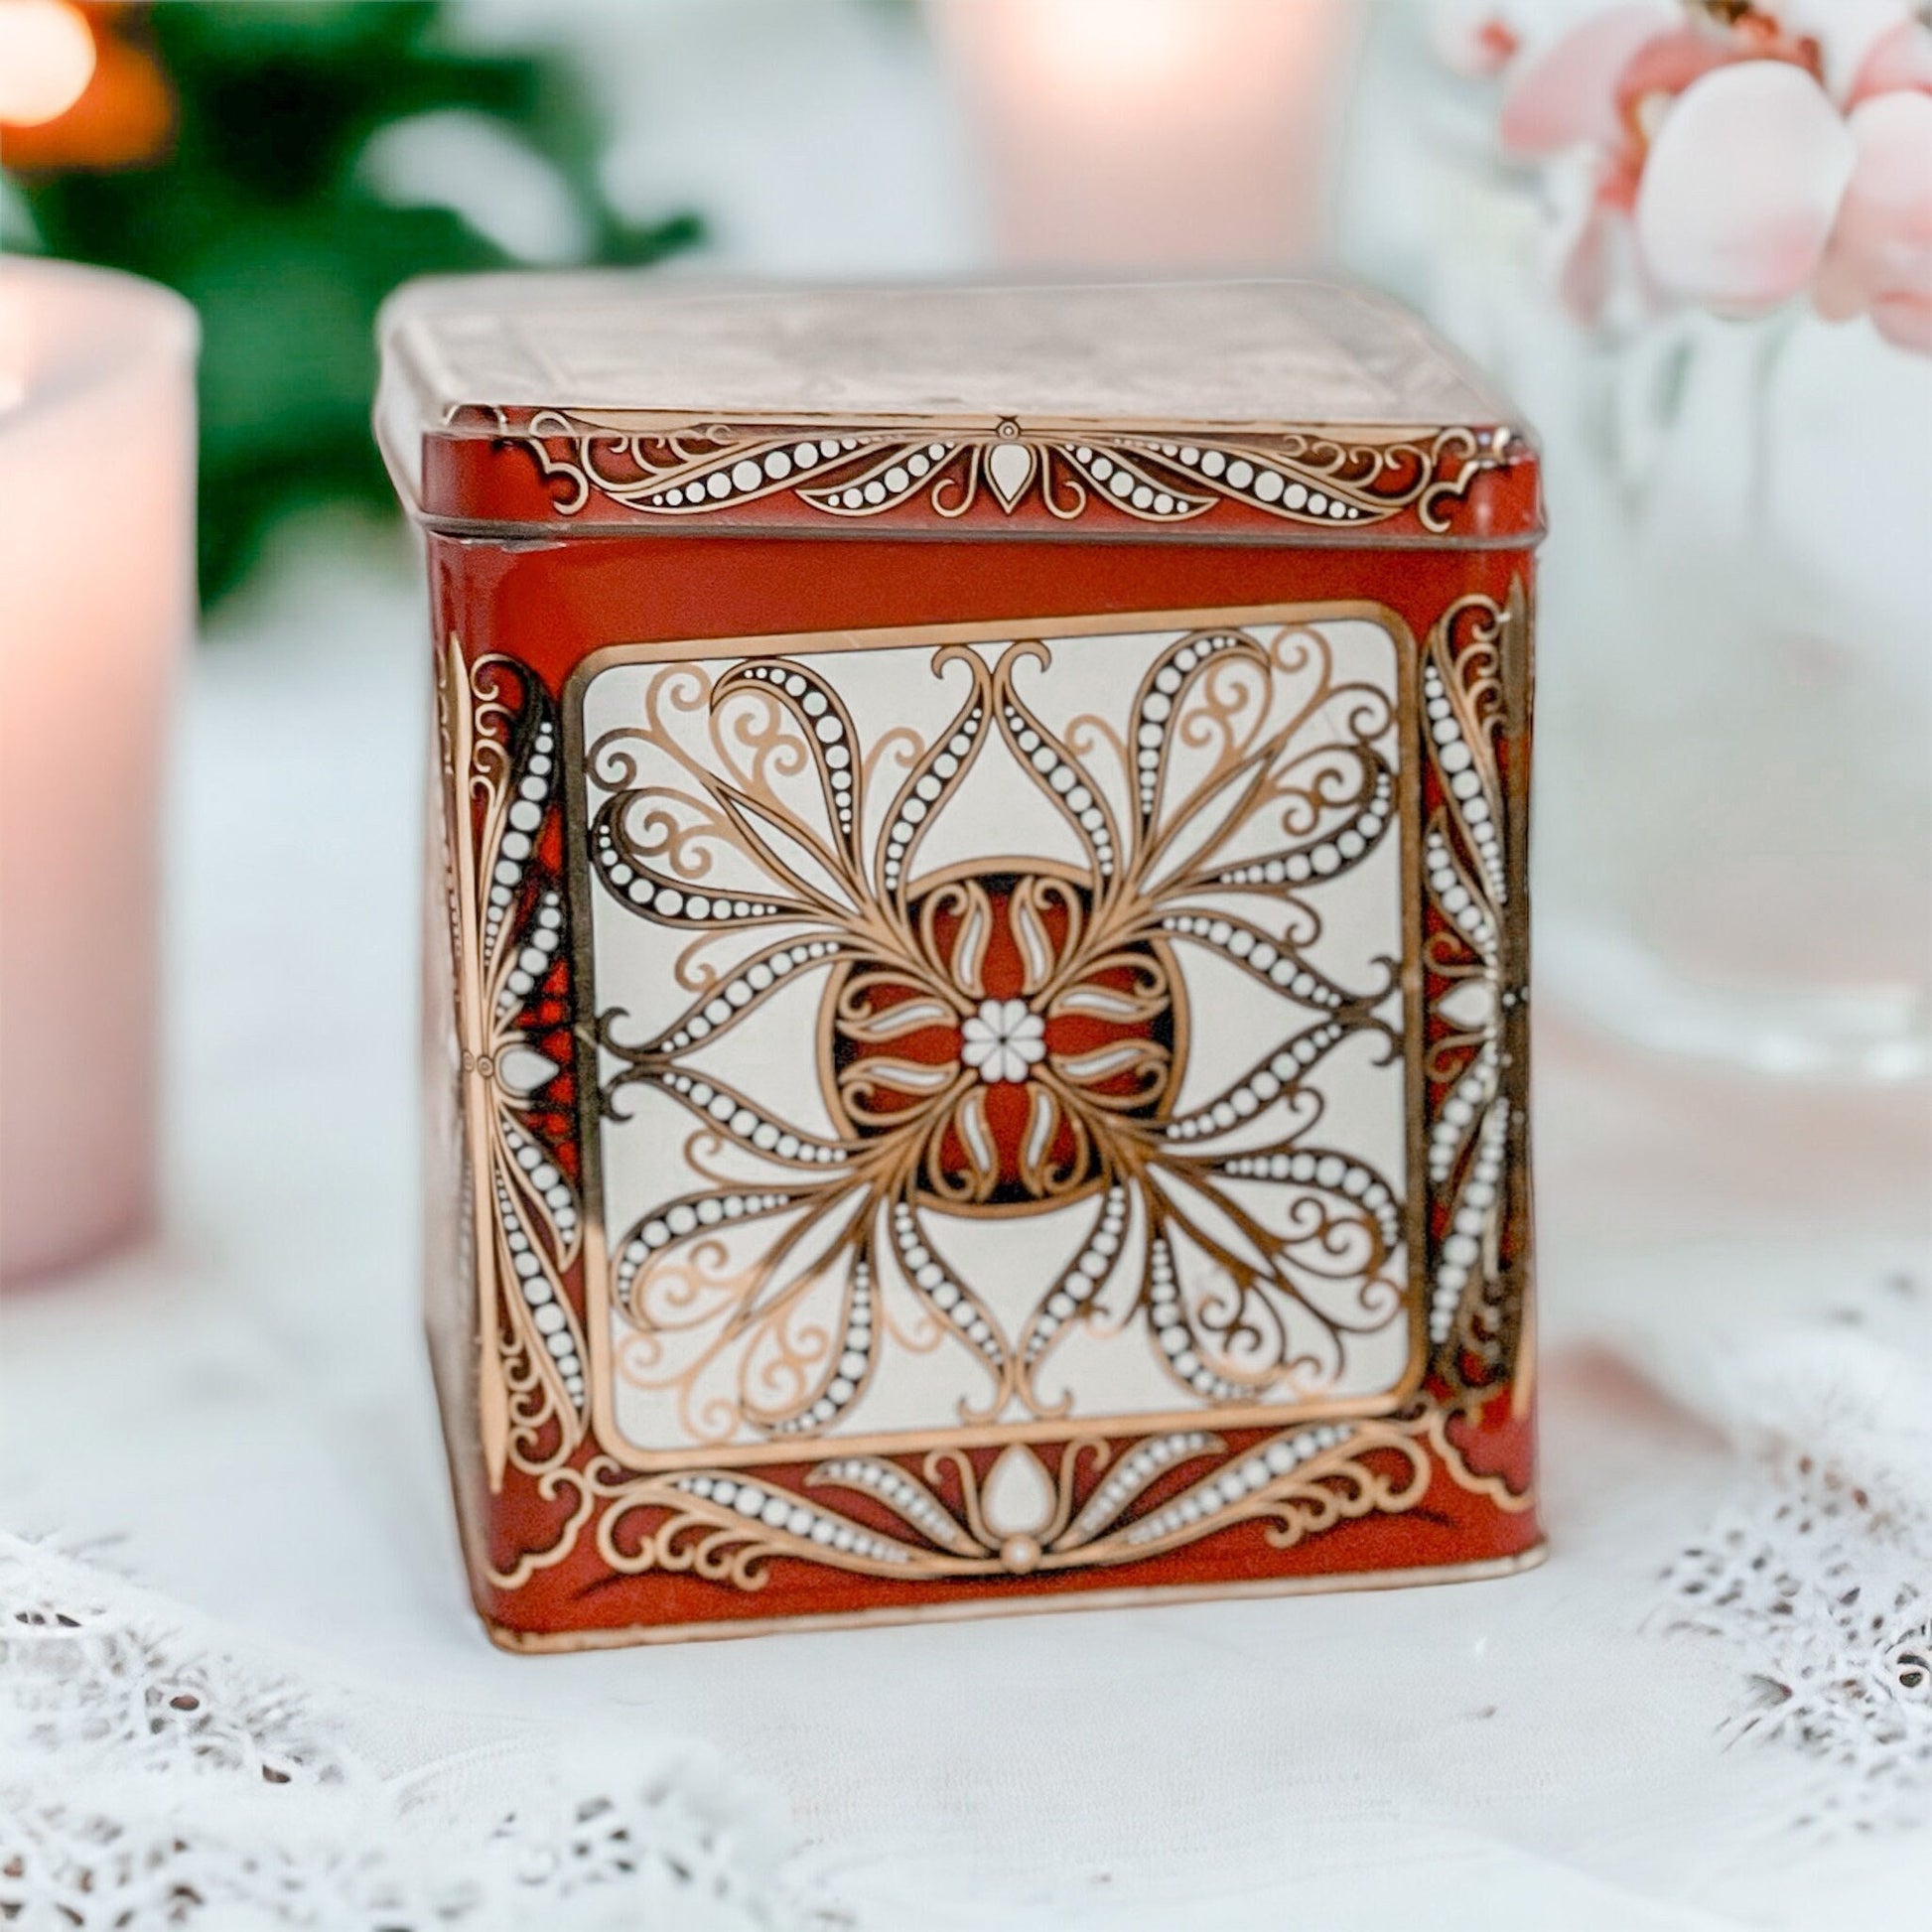 Scented Candle in Vintage Biscuit/Tea Tin